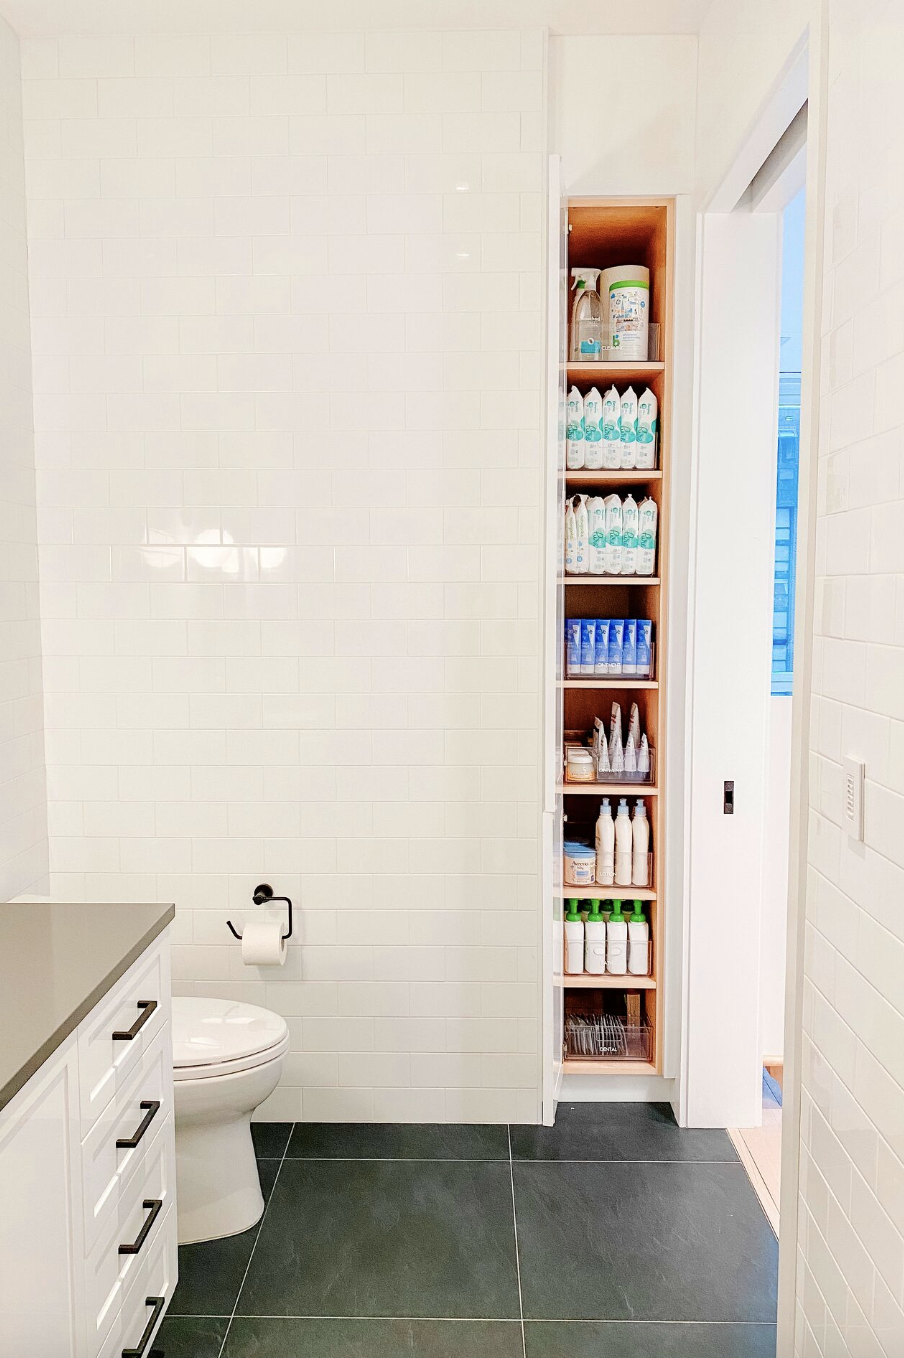 How to Use Bathroom Shelves to Organize Your Space